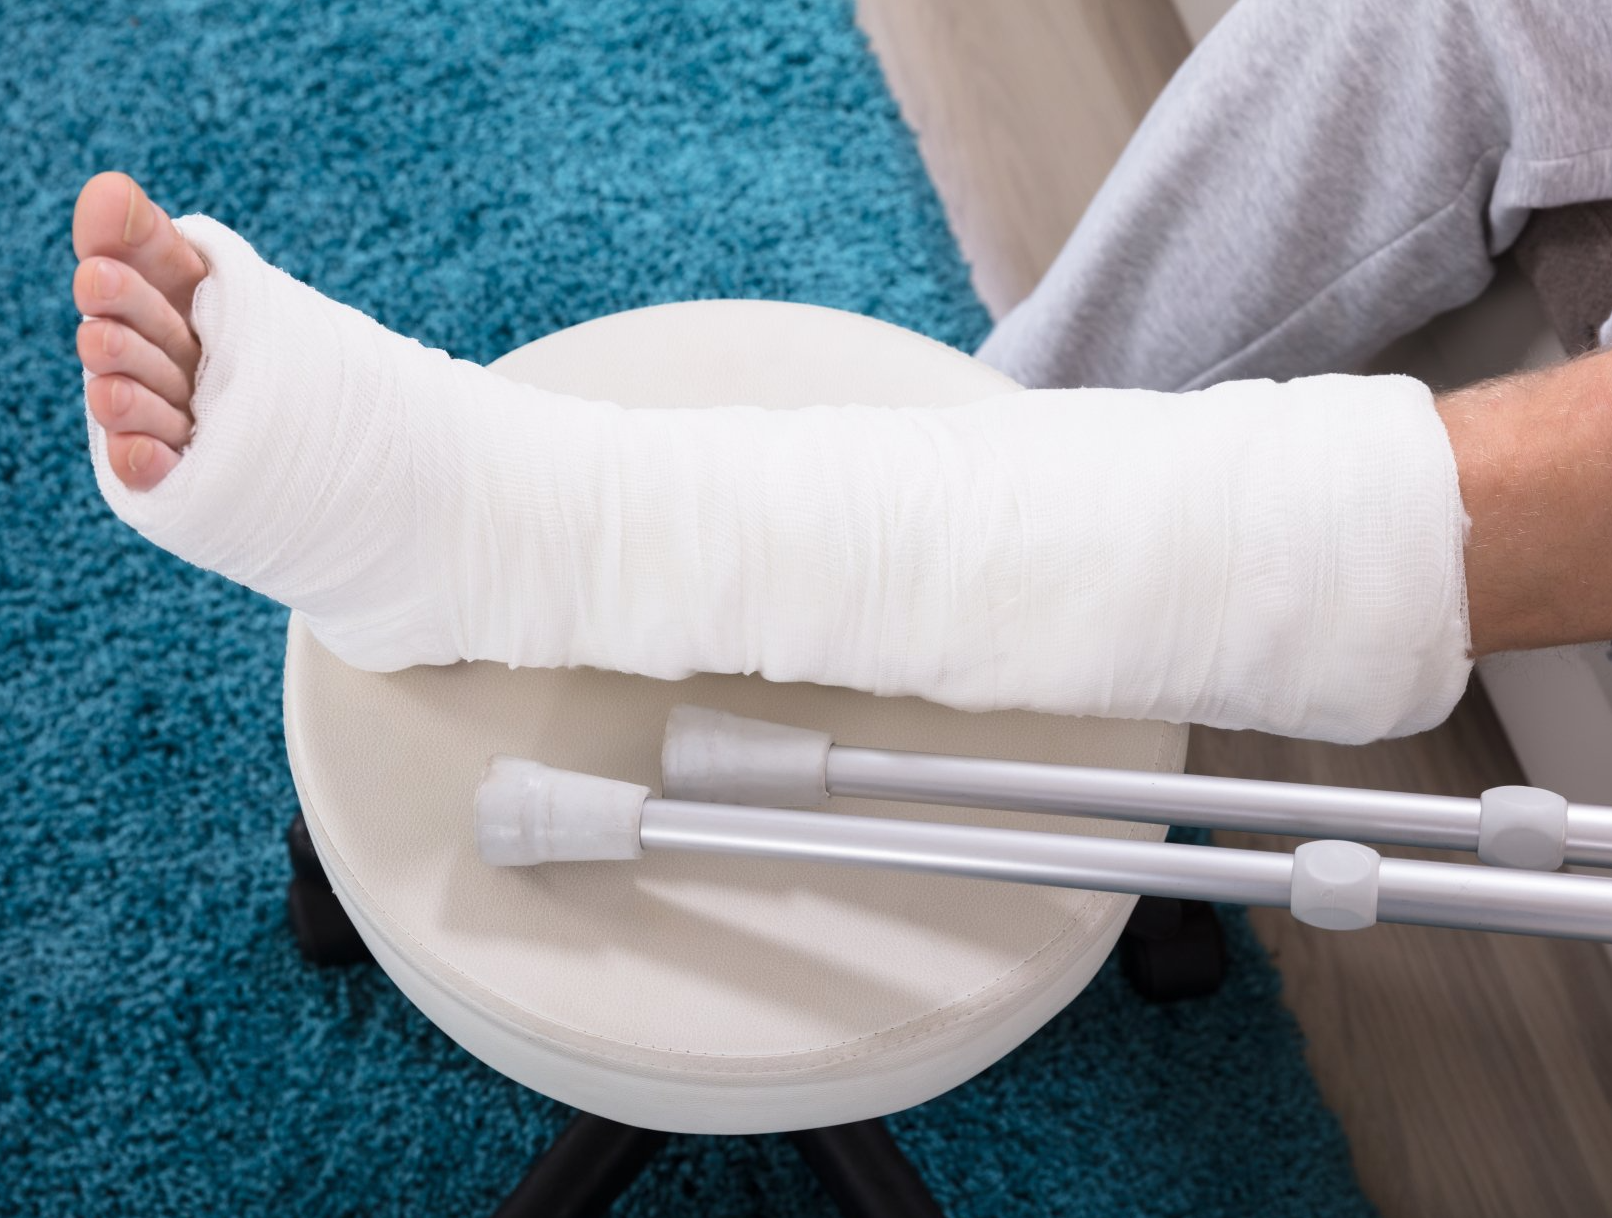 Patient with leg in plaster and crutches unable to work